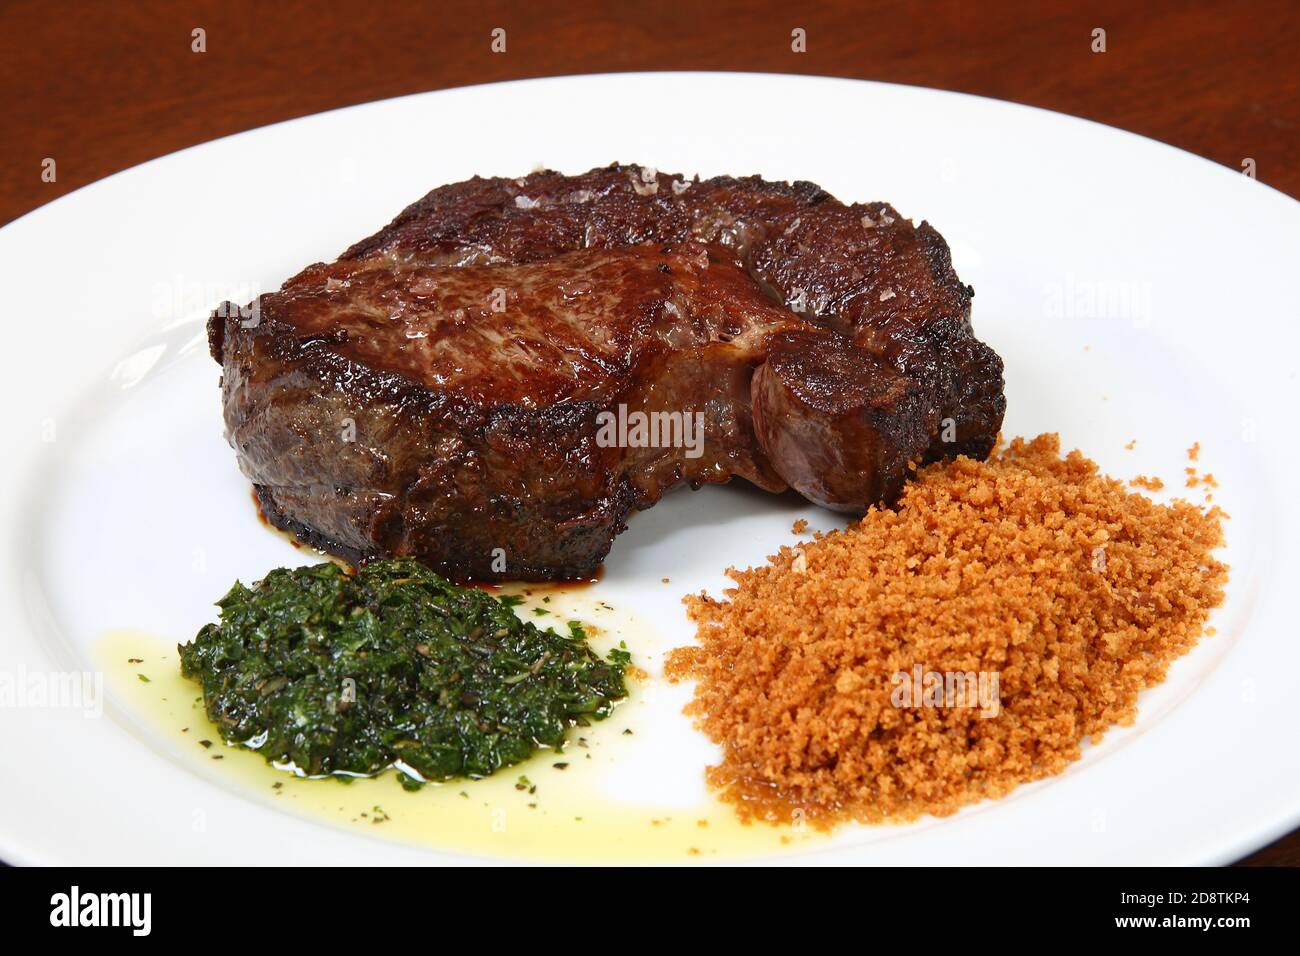 Steak with fried garlic and chimichurri sauce Stock Photo